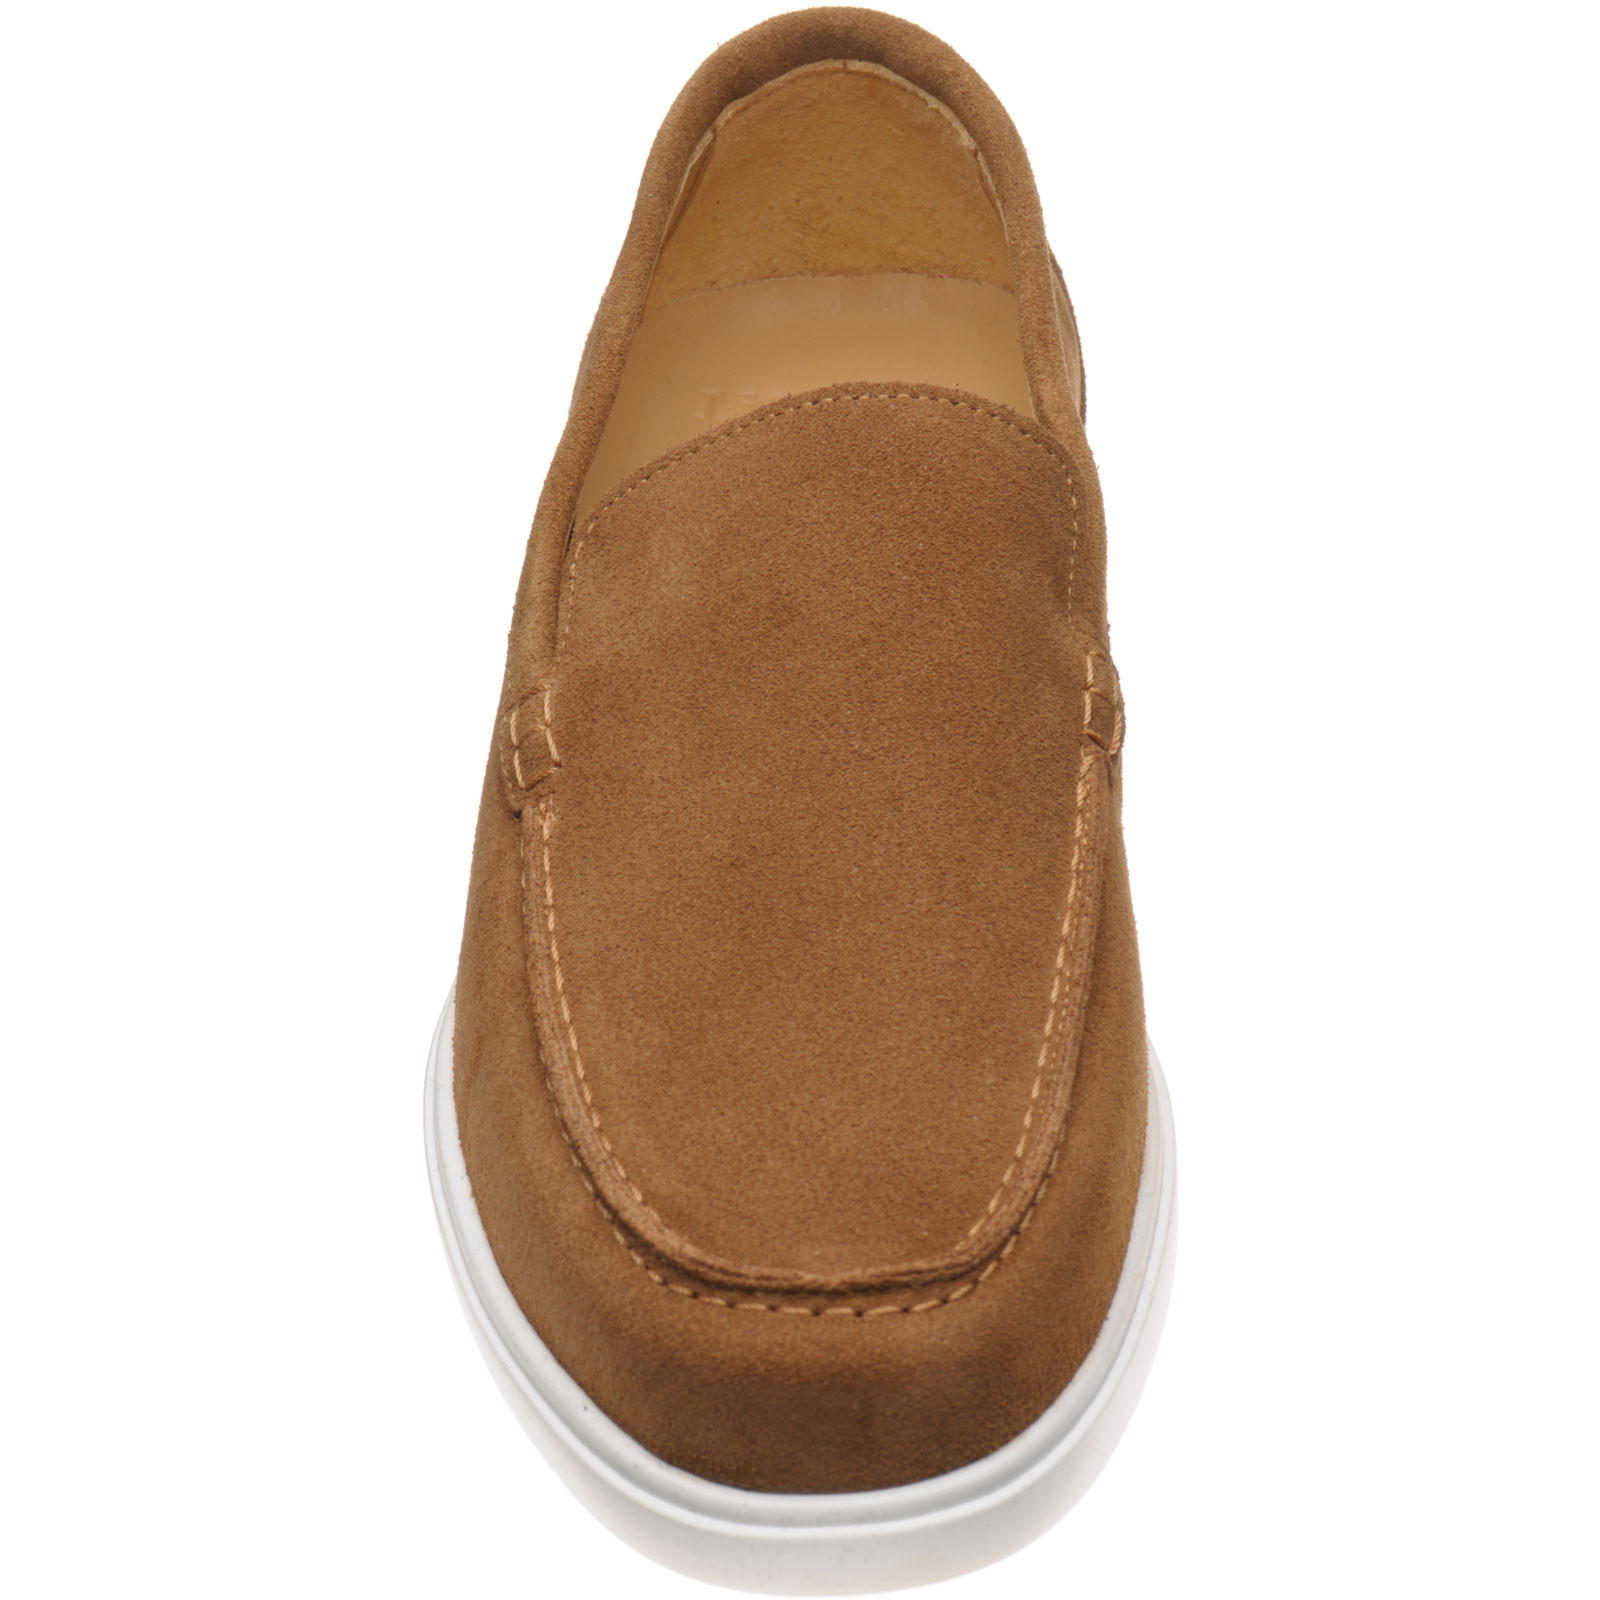 Loake shoes | Loake Lifestyle | Tuscany rubber-soled loafers in ...